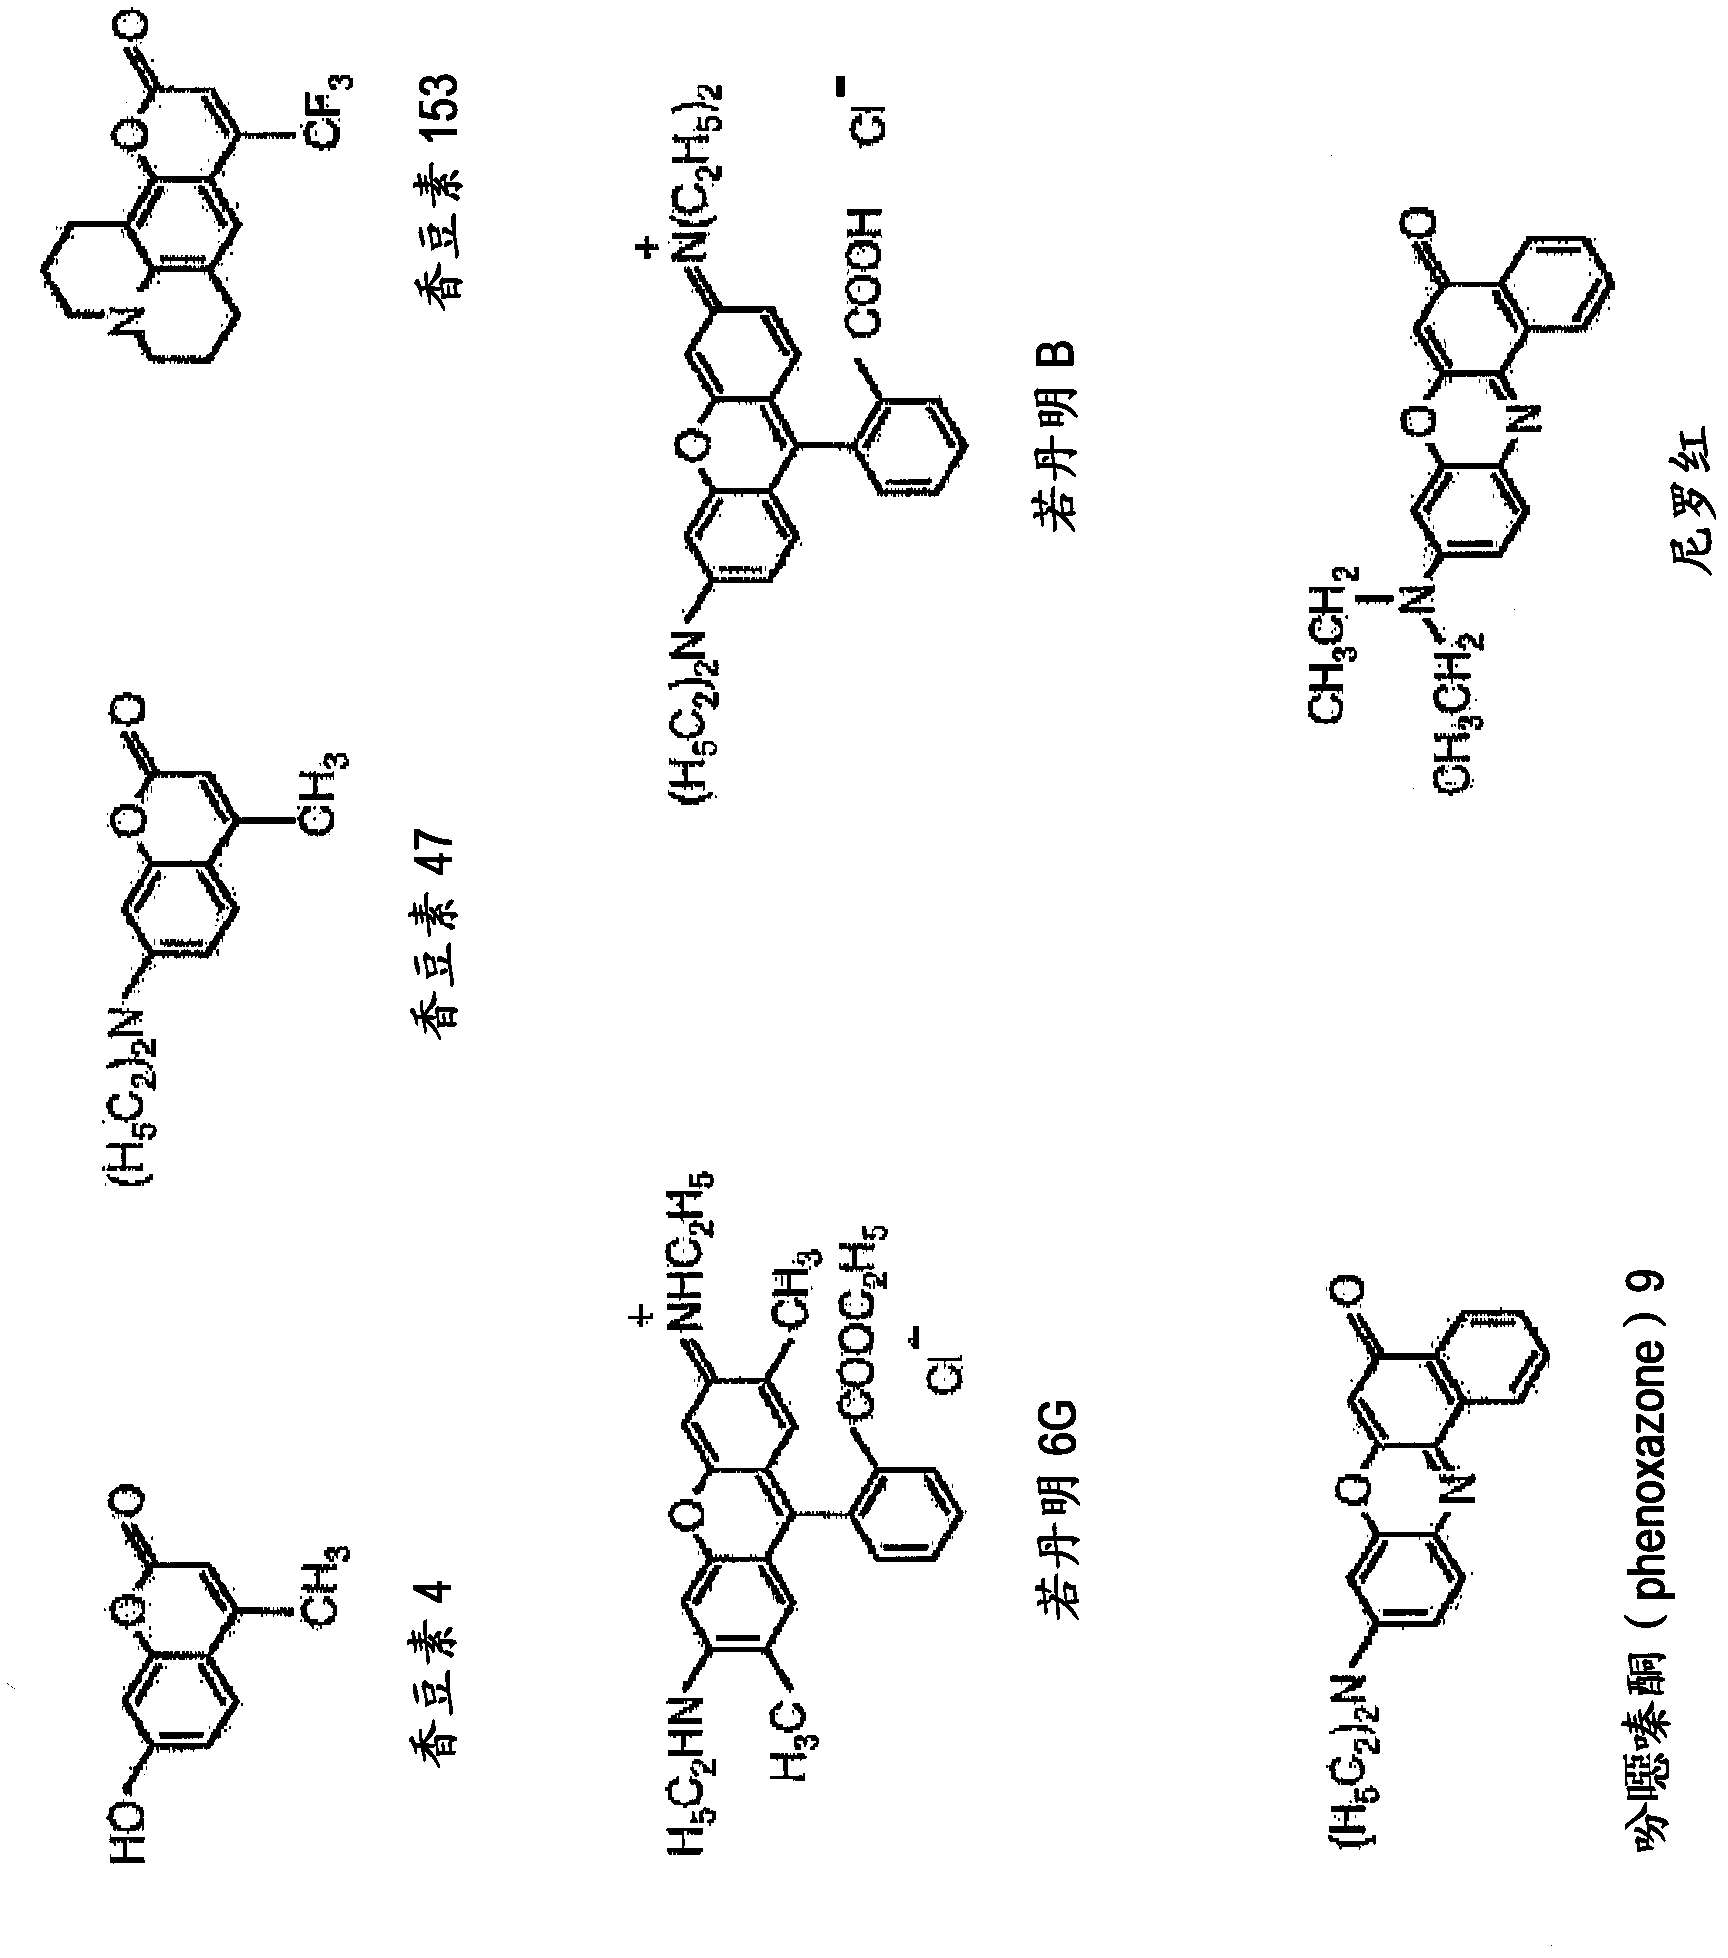 Singlet harvesting with organic molecules for optoelectronic devices